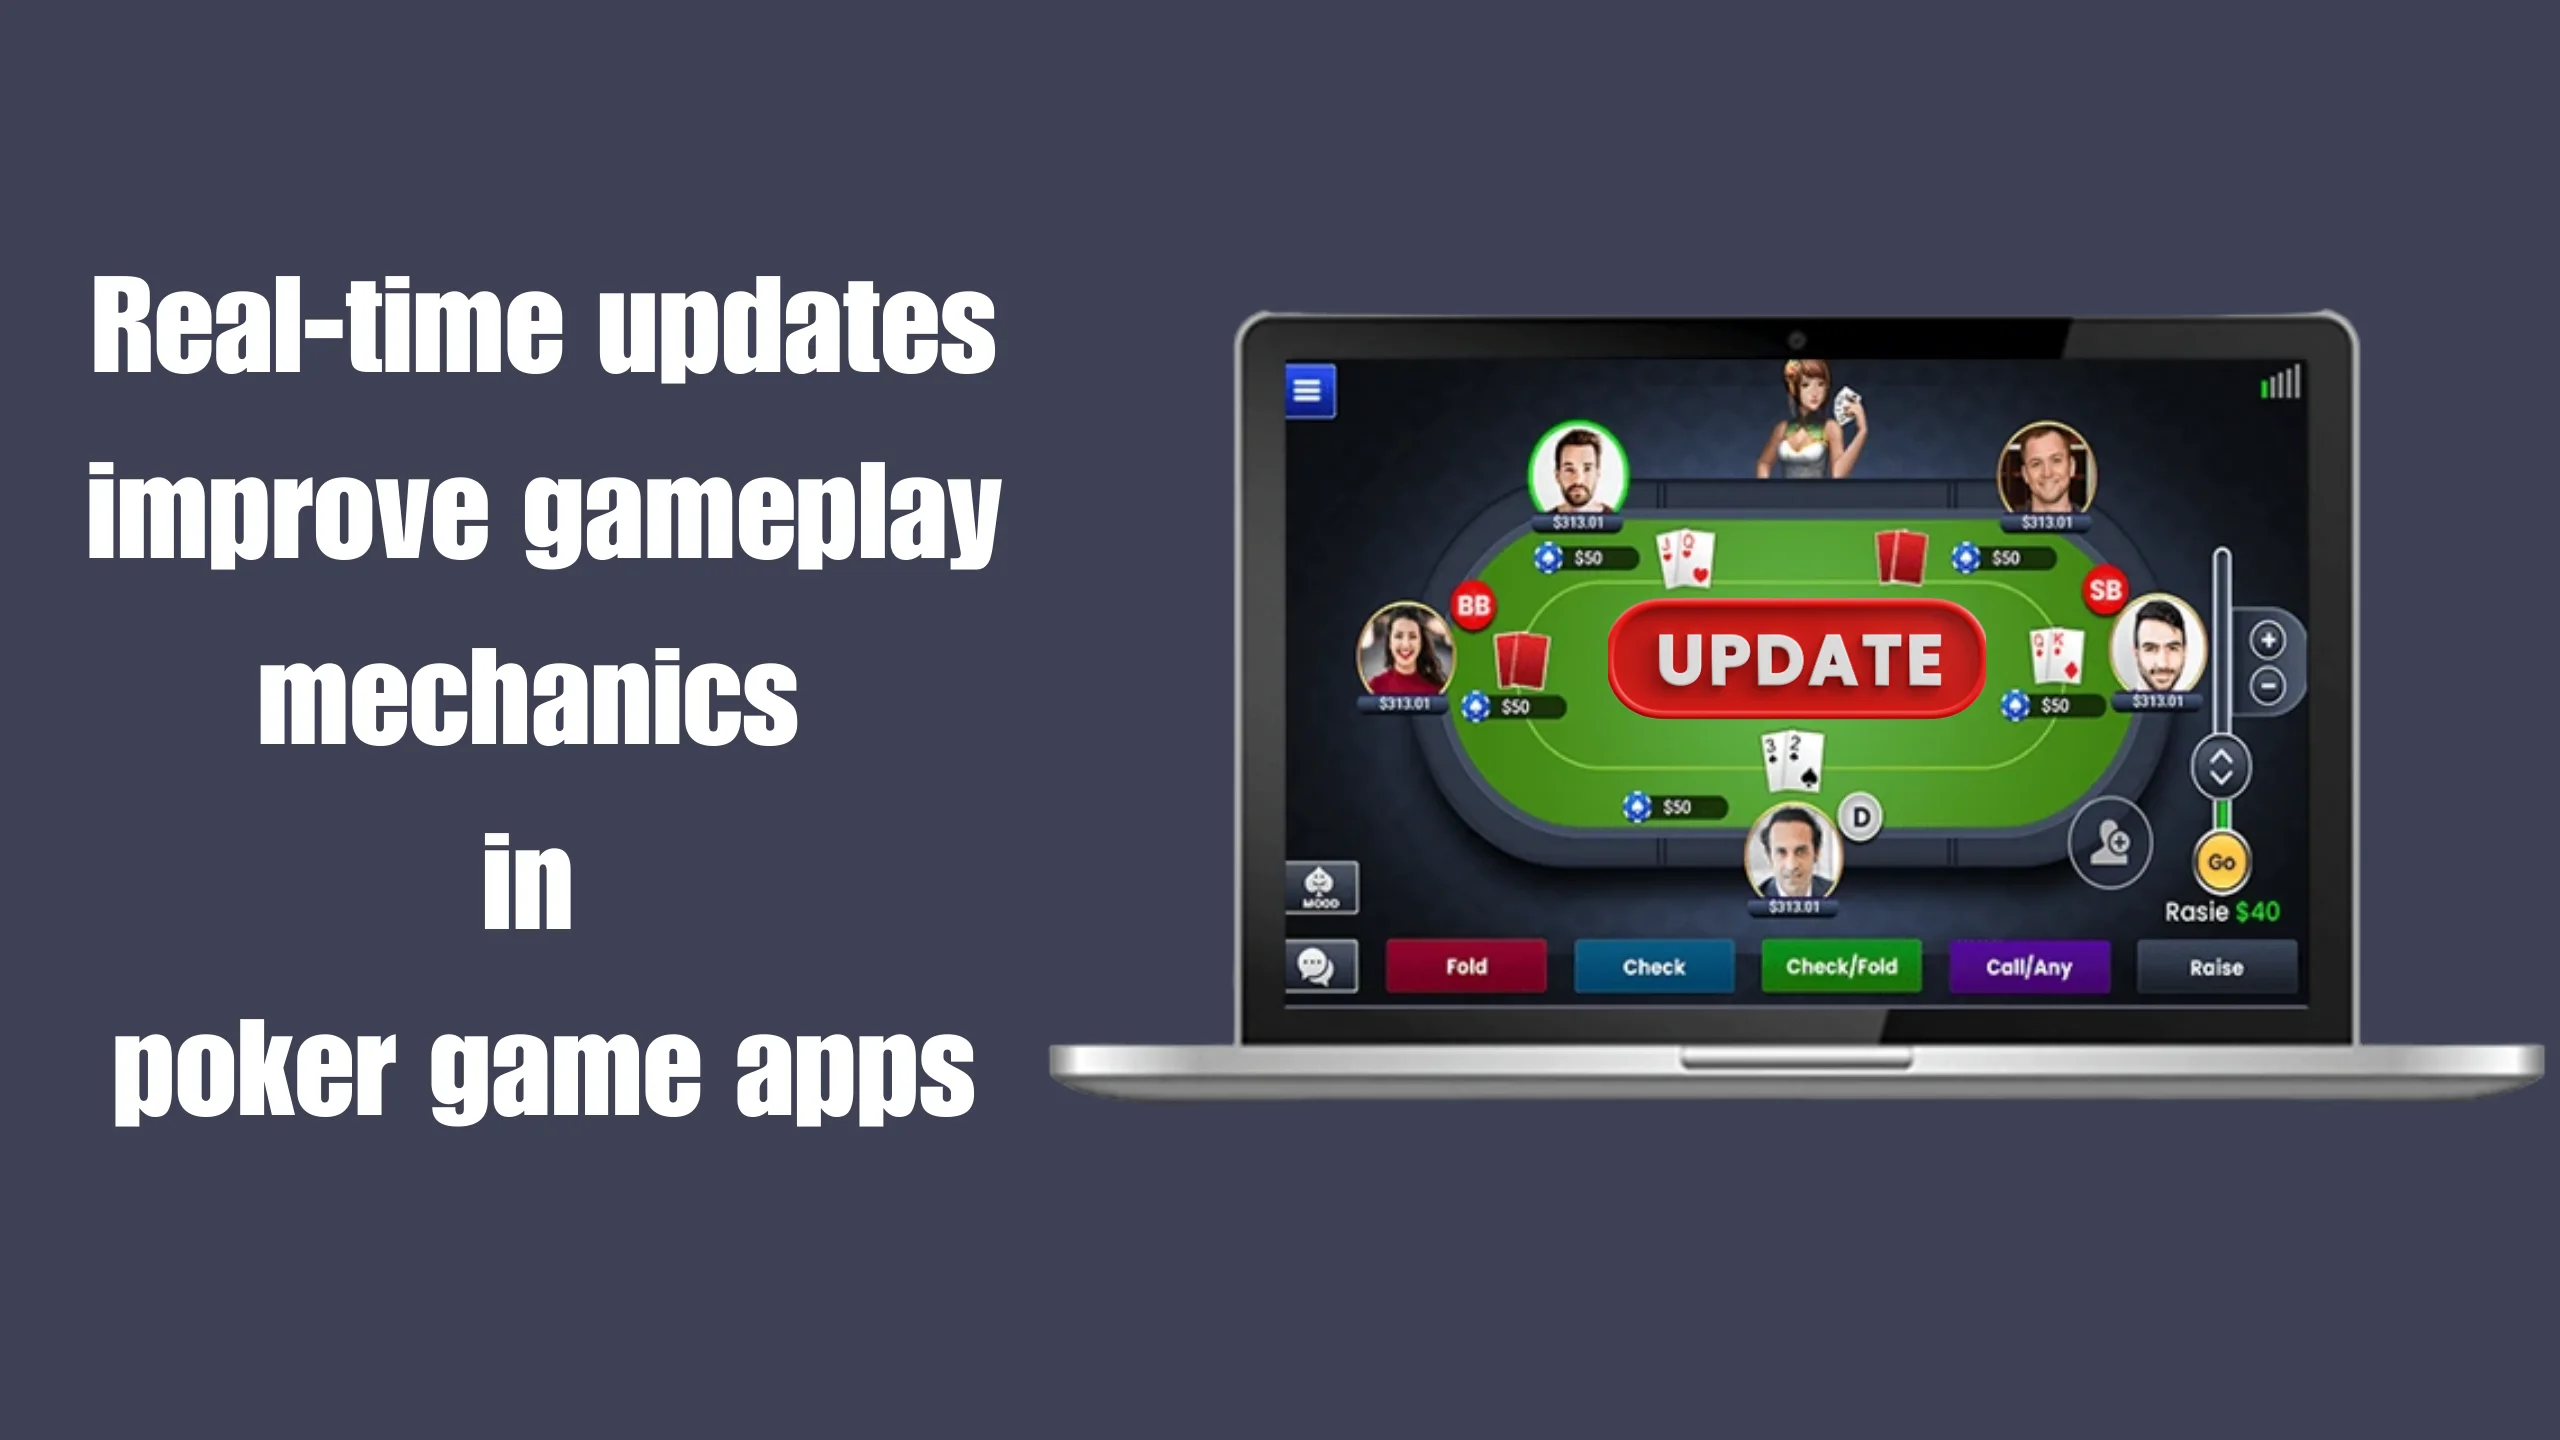 Real-time updates optimize gameplay mechanics, enriching user experience in poker game apps. Stay engaged with dynamic features that elevate gaming interactions and strategies.